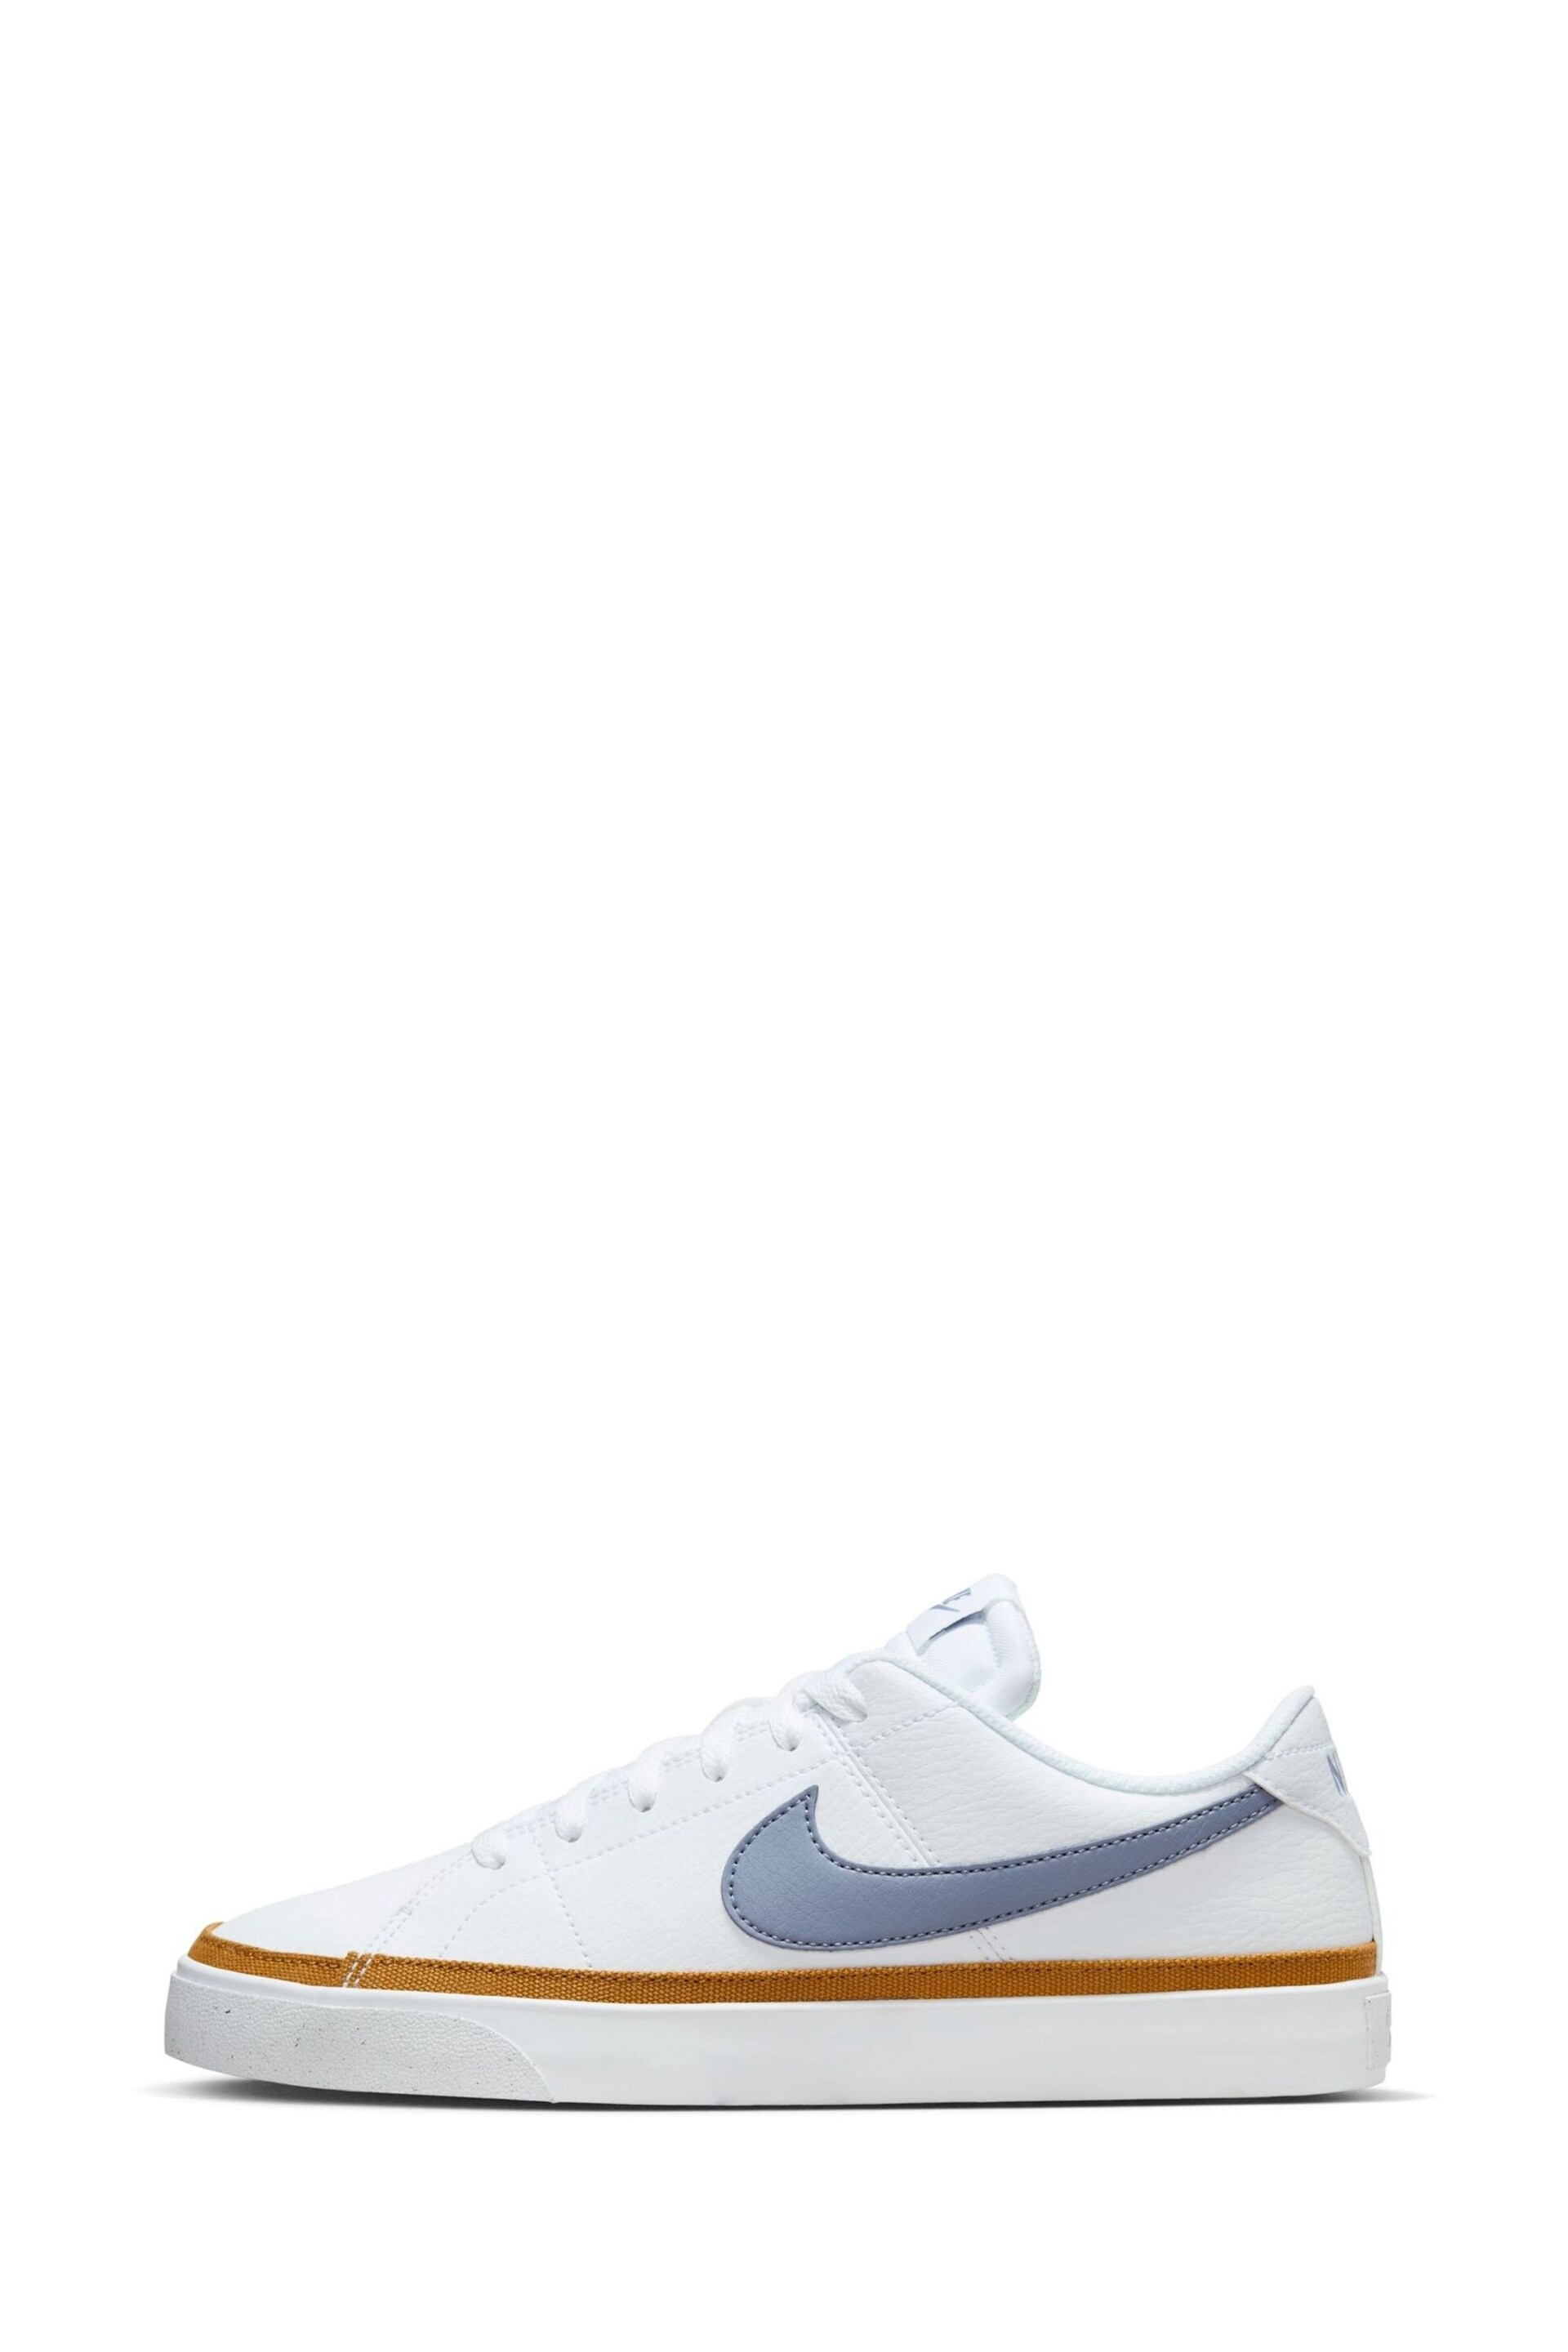 Nike White/Blue Court Legacy Trainers - Image 2 of 11